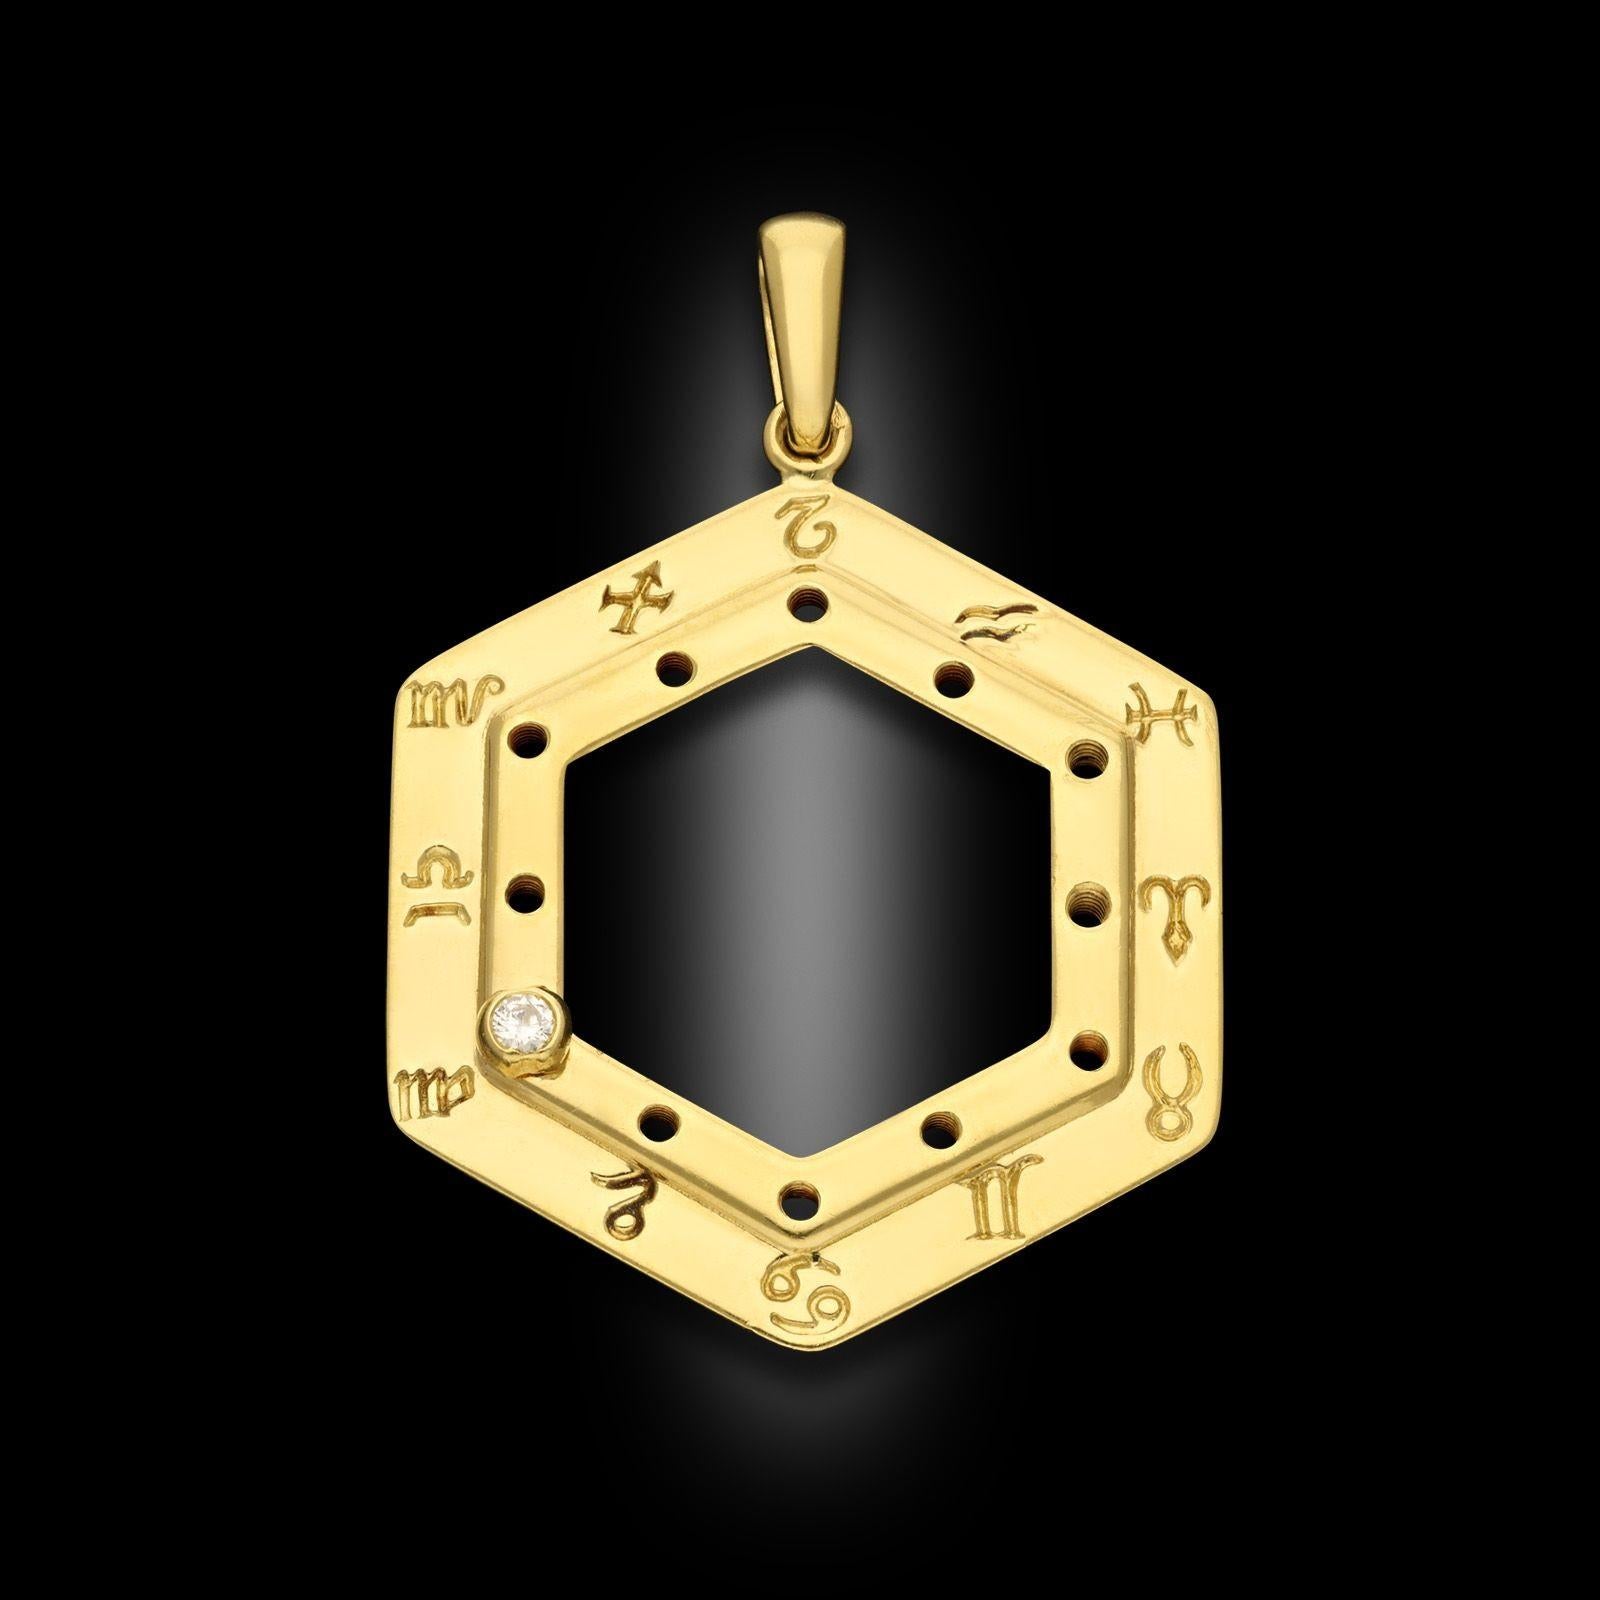 A vintage Cartier zodiac pendant circa 1990. This hexagonal 18ct yellow gold pendant has all 12 zodiac signs engraved around the edge and has a bezel set round brilliant cut diamond with a screw fixture which can be moved and placed on your zodiac